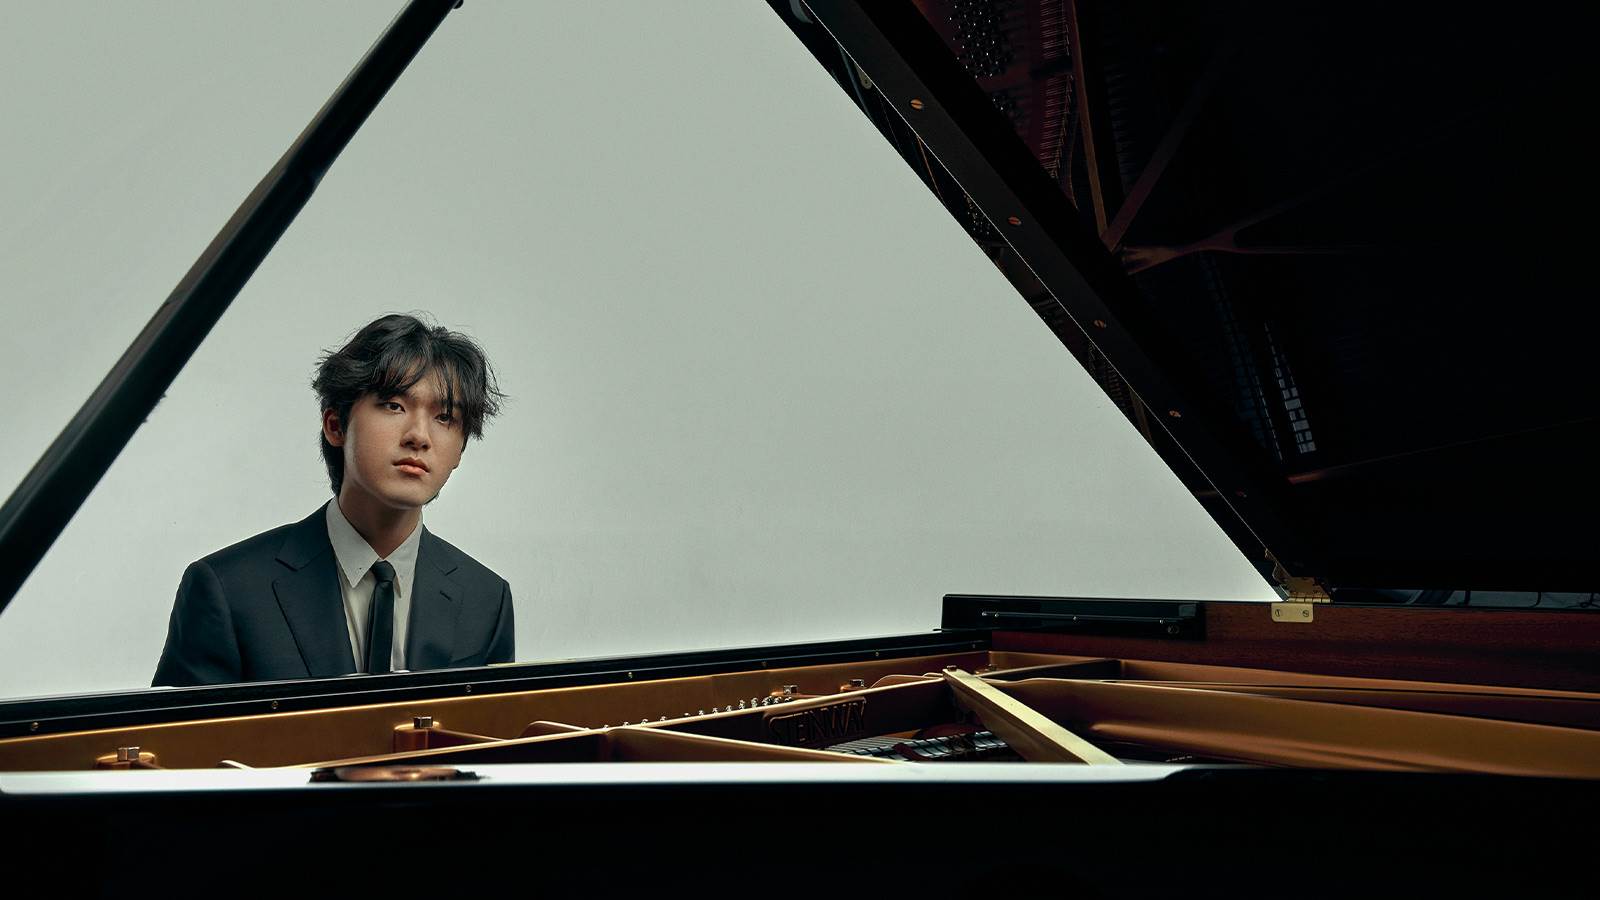 Artist, Yunchan Lim, sitting in front of a open grand piano. He has black hair and wearing a grey suit.